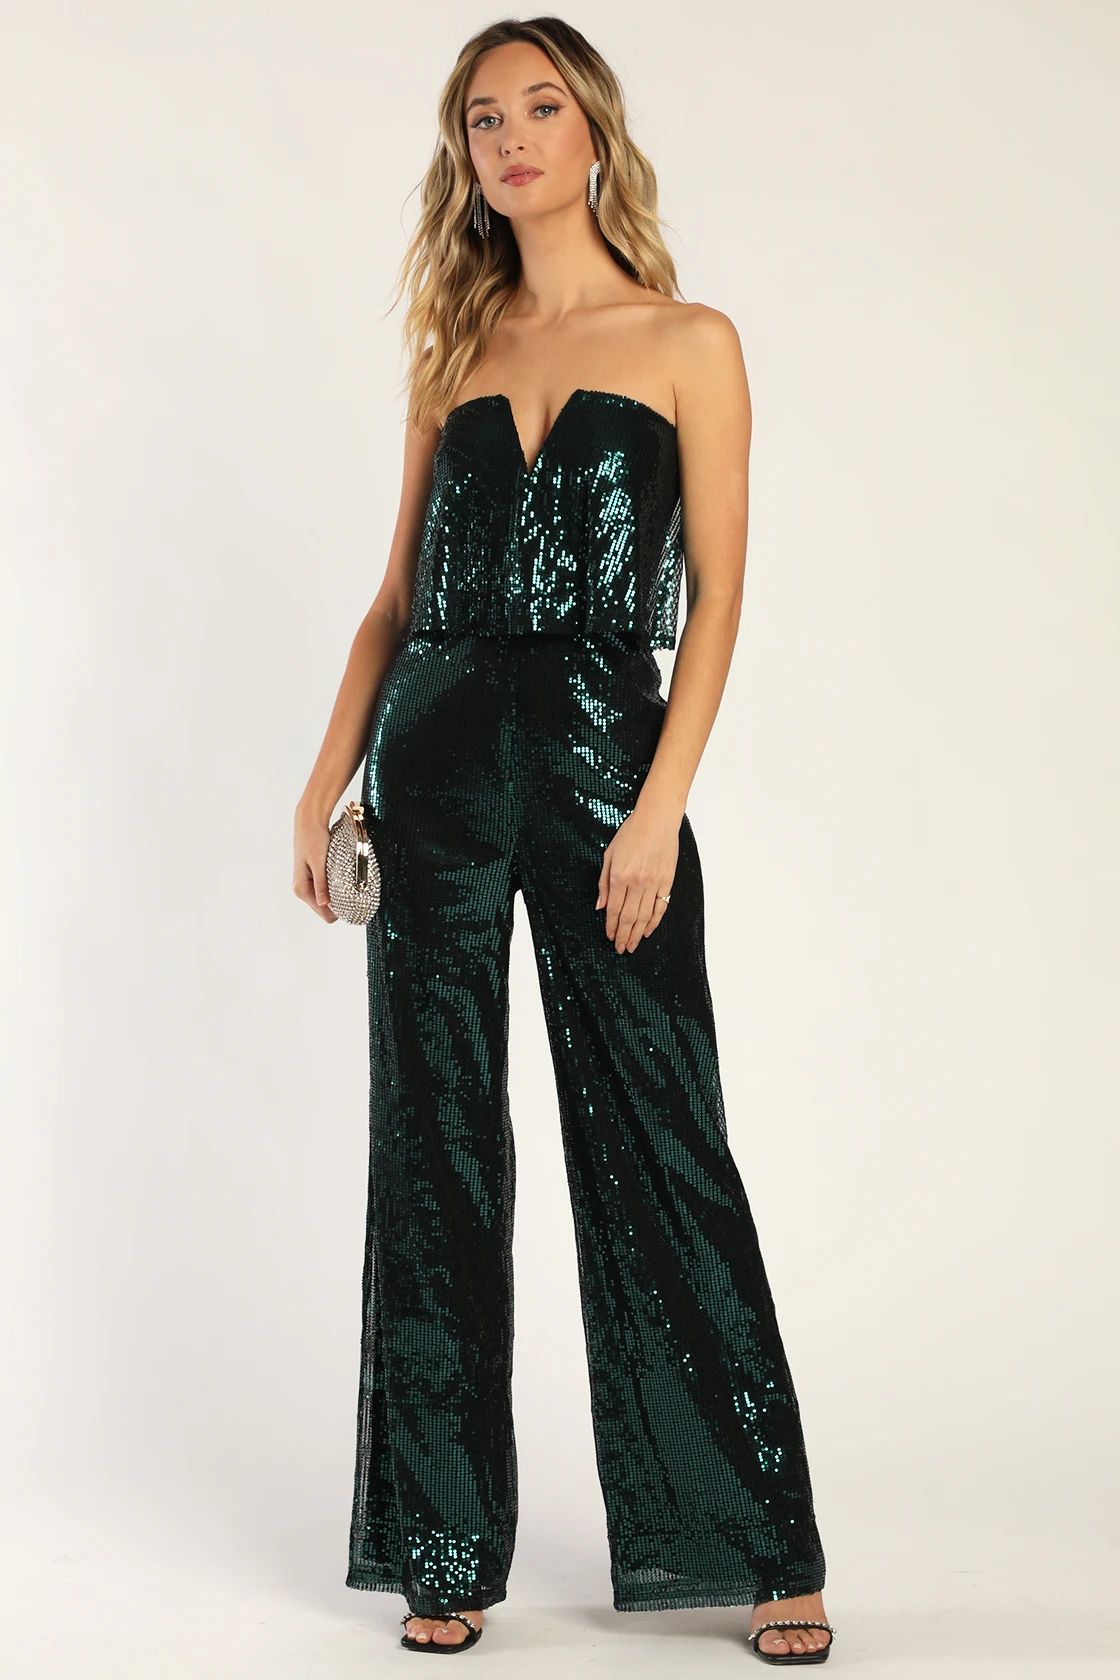 Power of Love Emerald Green Sequin Strapless Jumpsuit | Lulus (US)